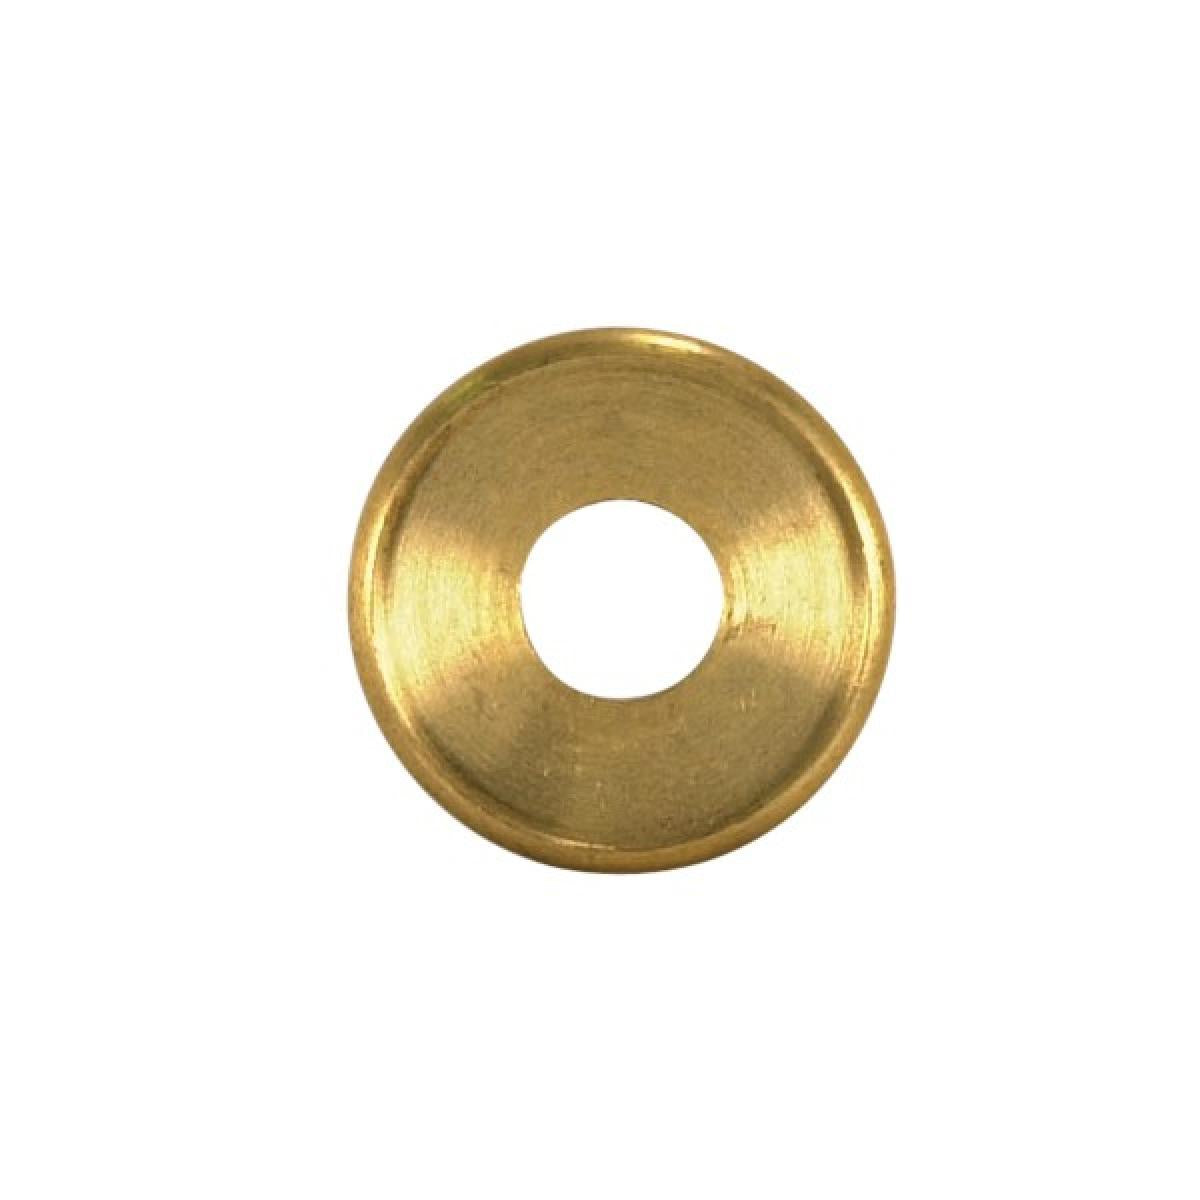 Satco 90-1602 Turned Brass Check Ring 1/8 IP Slip Unfinished 1-1/8" Diameter